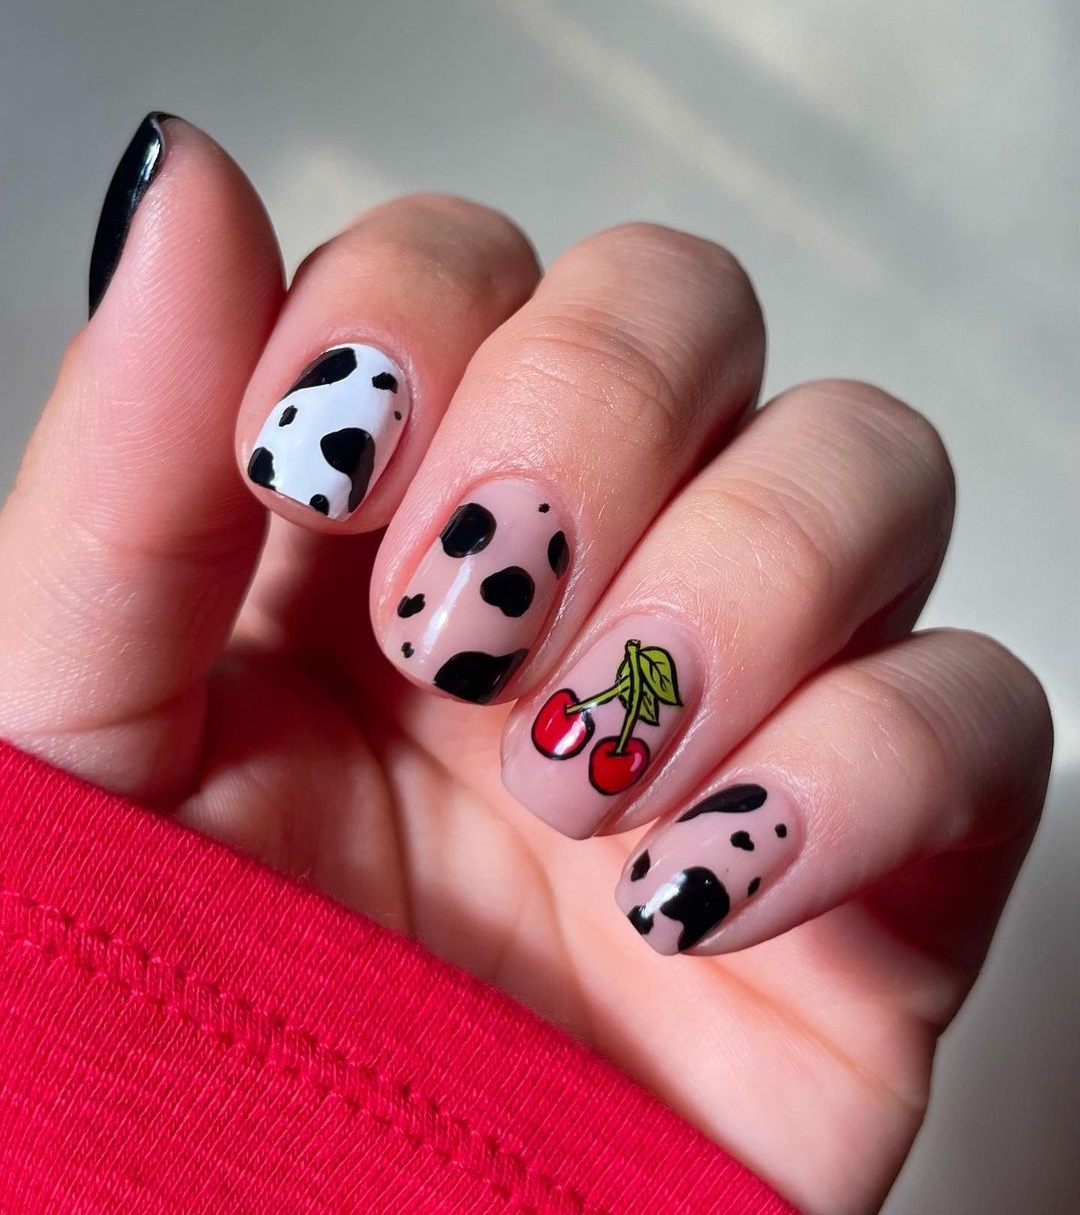 0Short Round Nails with Cow Print Design